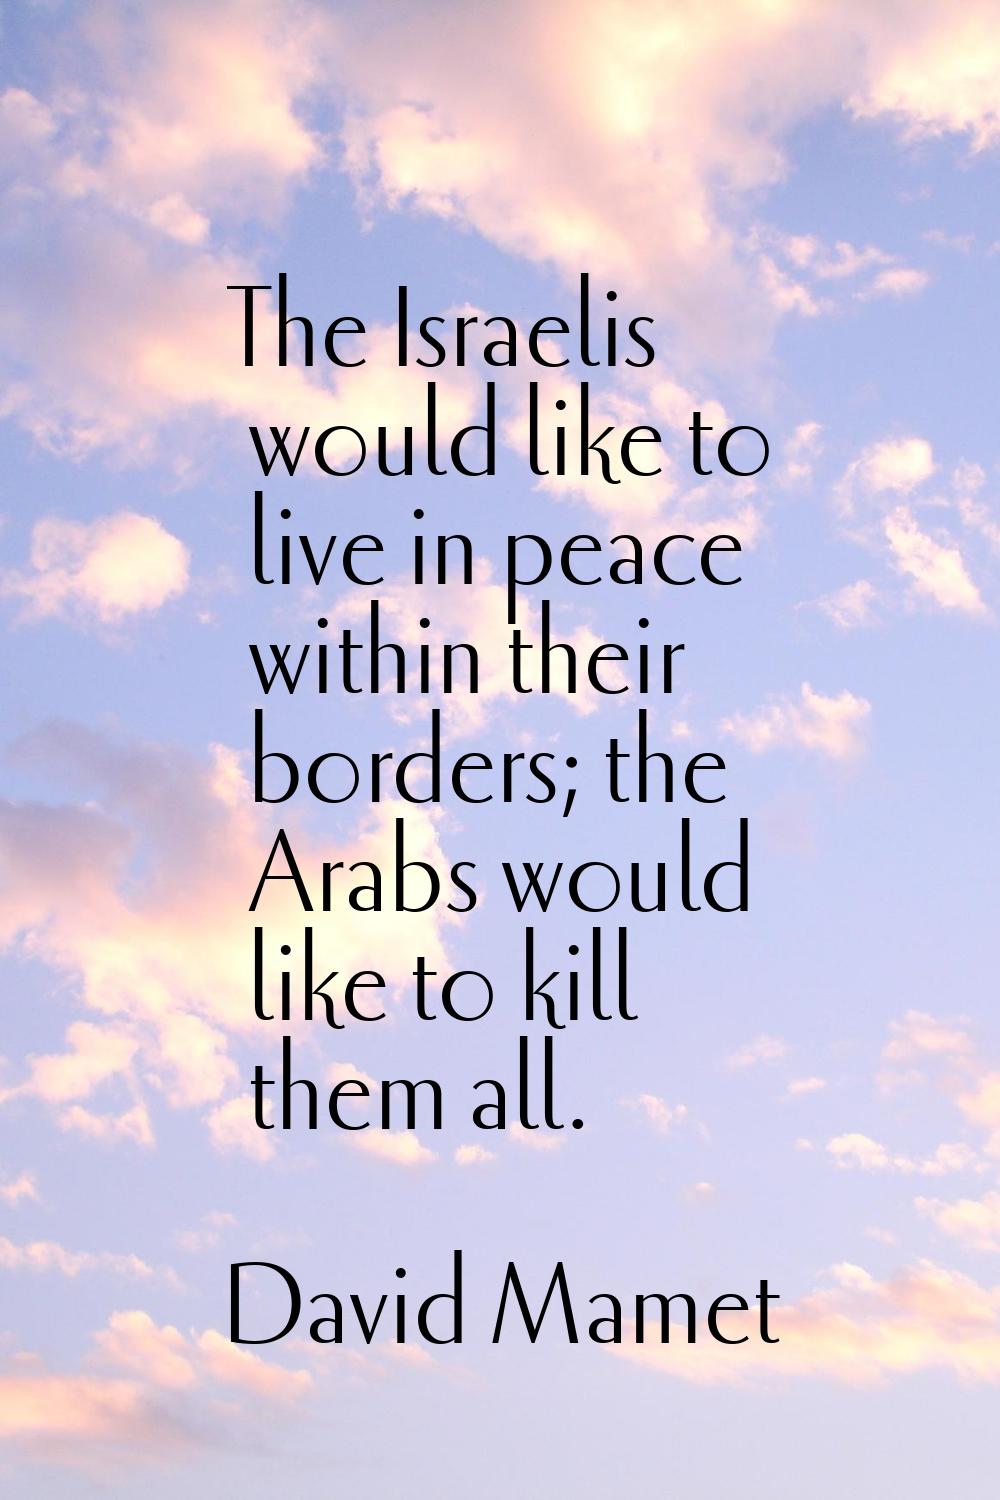 The Israelis would like to live in peace within their borders; the Arabs would like to kill them al